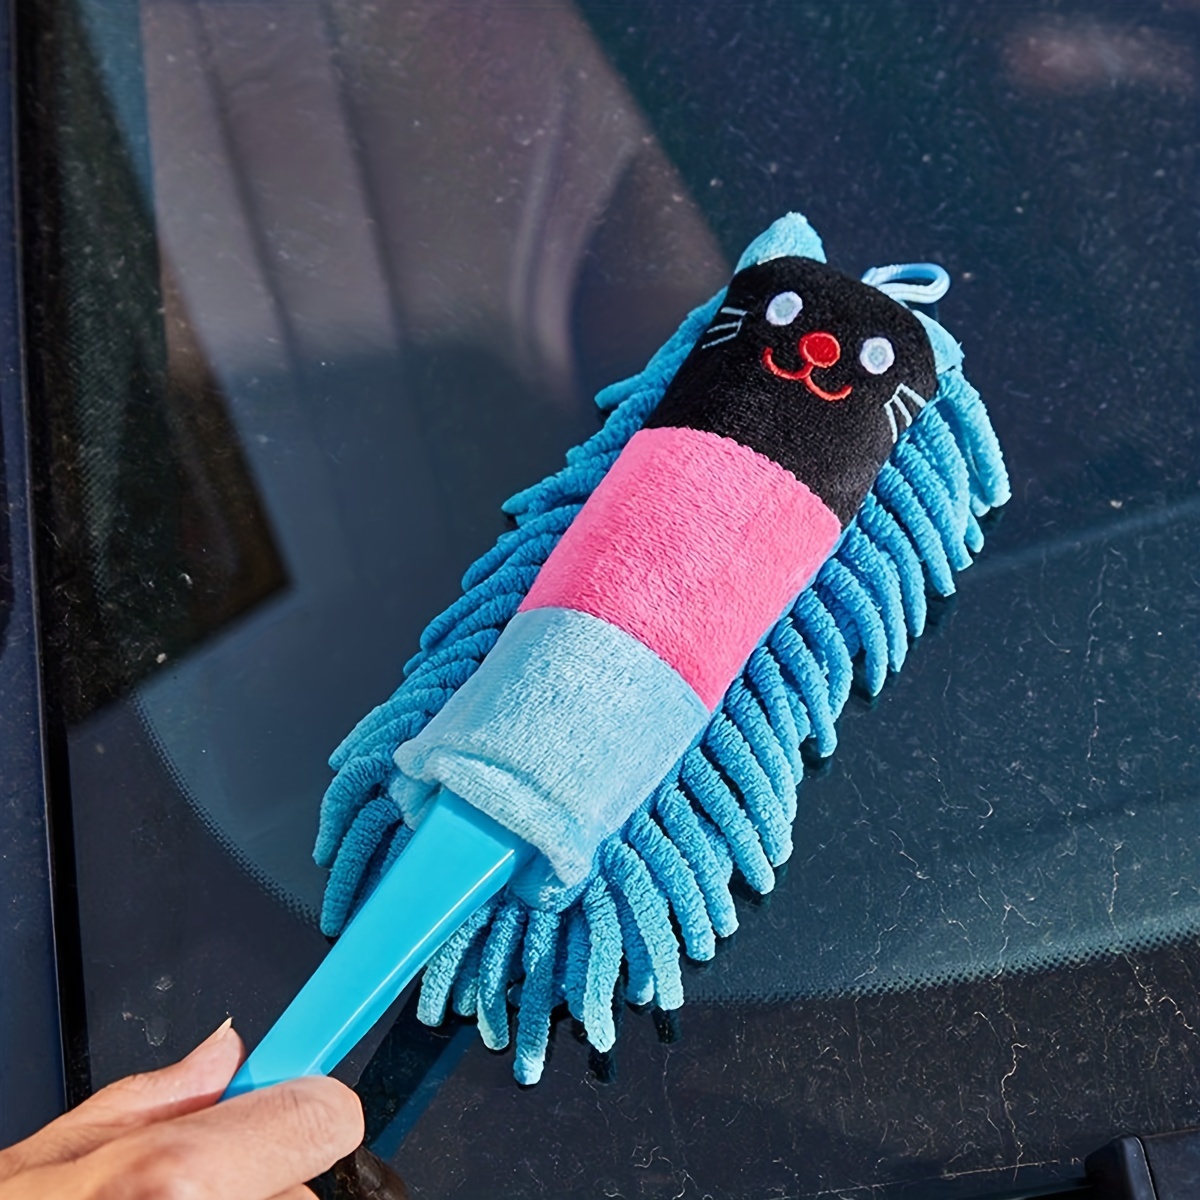 1PC Microfiber Dusting Cleaning Glove Cars Windows Dust Remover Tool  Reusable Cleaning Glove Household Cleaning Tools